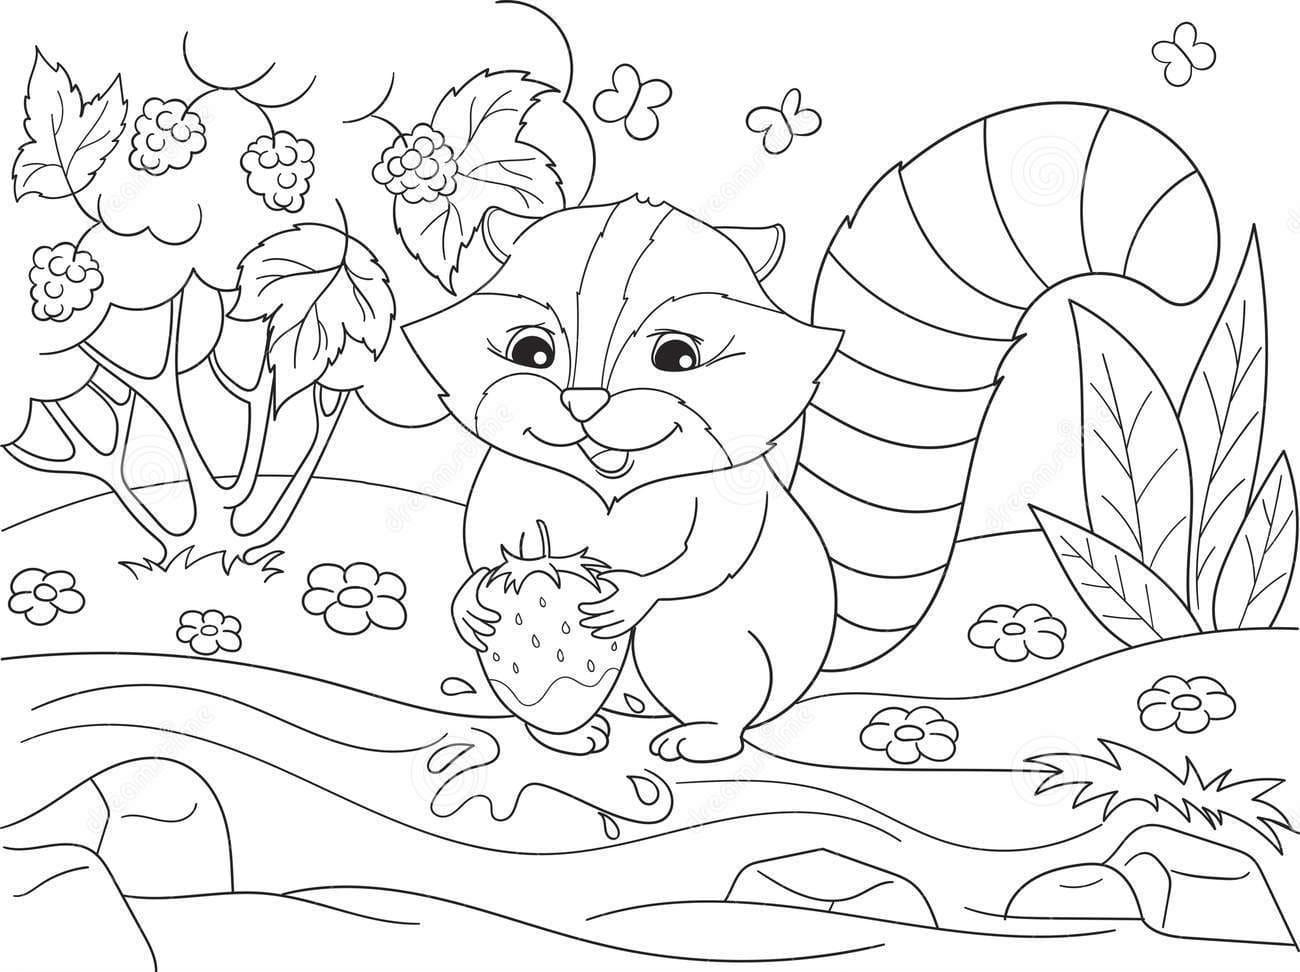 Northern Raccoon And Coon Washes Strawberries Coloring Page